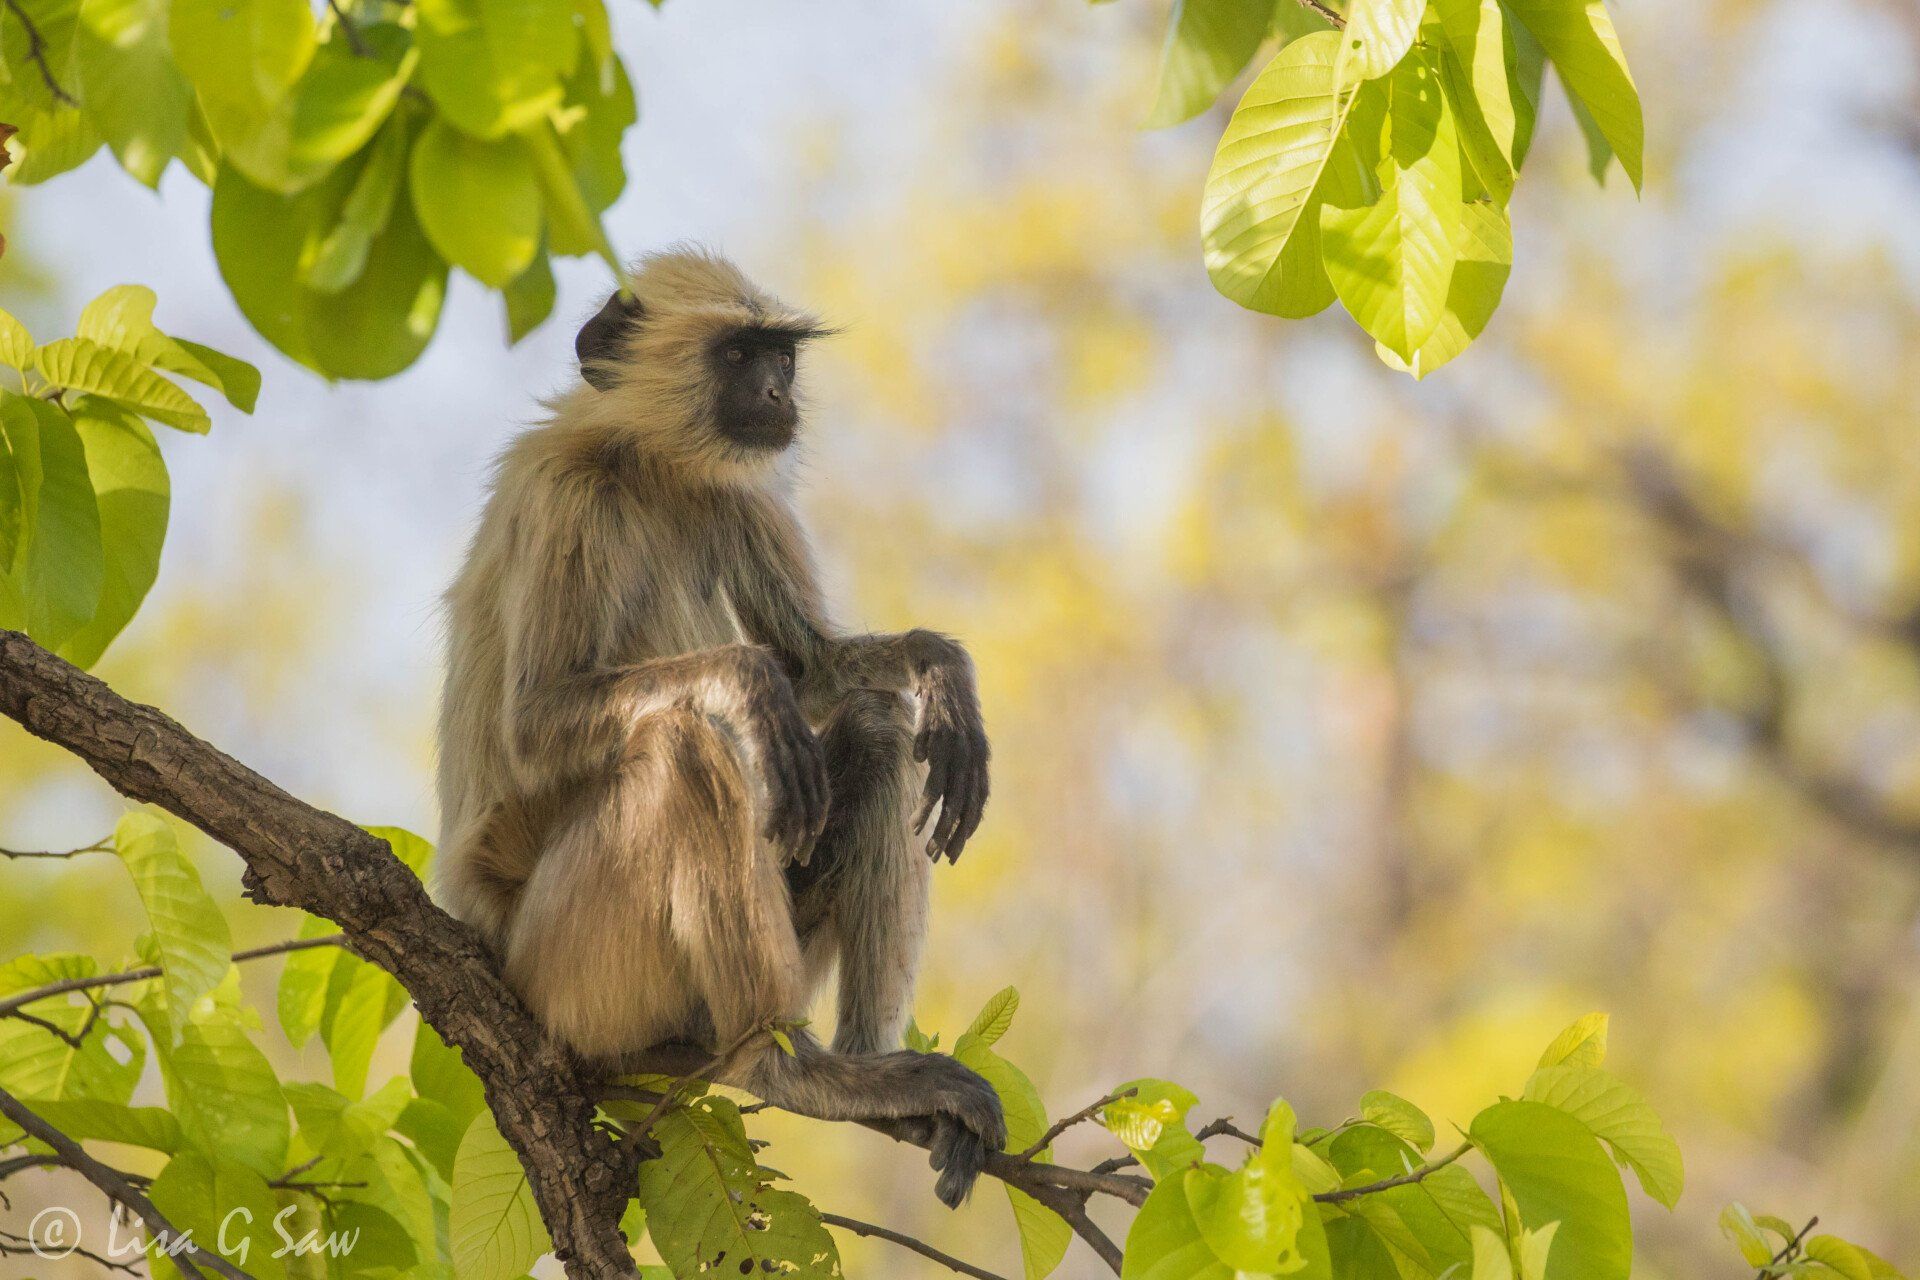 Langur sitting on branch with arms resting on knees